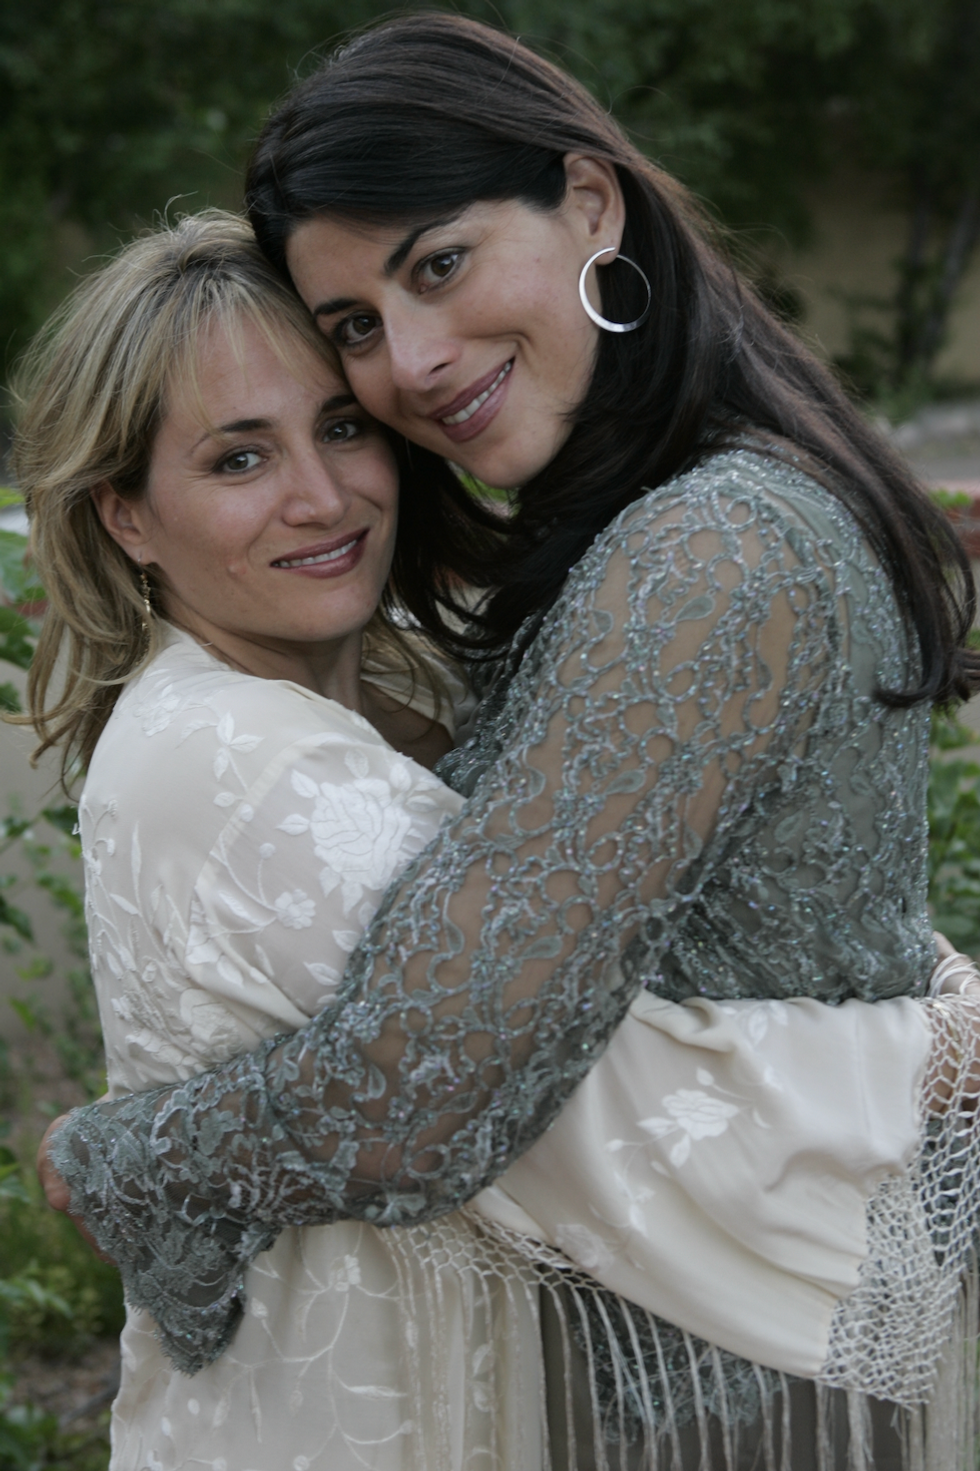 Two women embracing each other